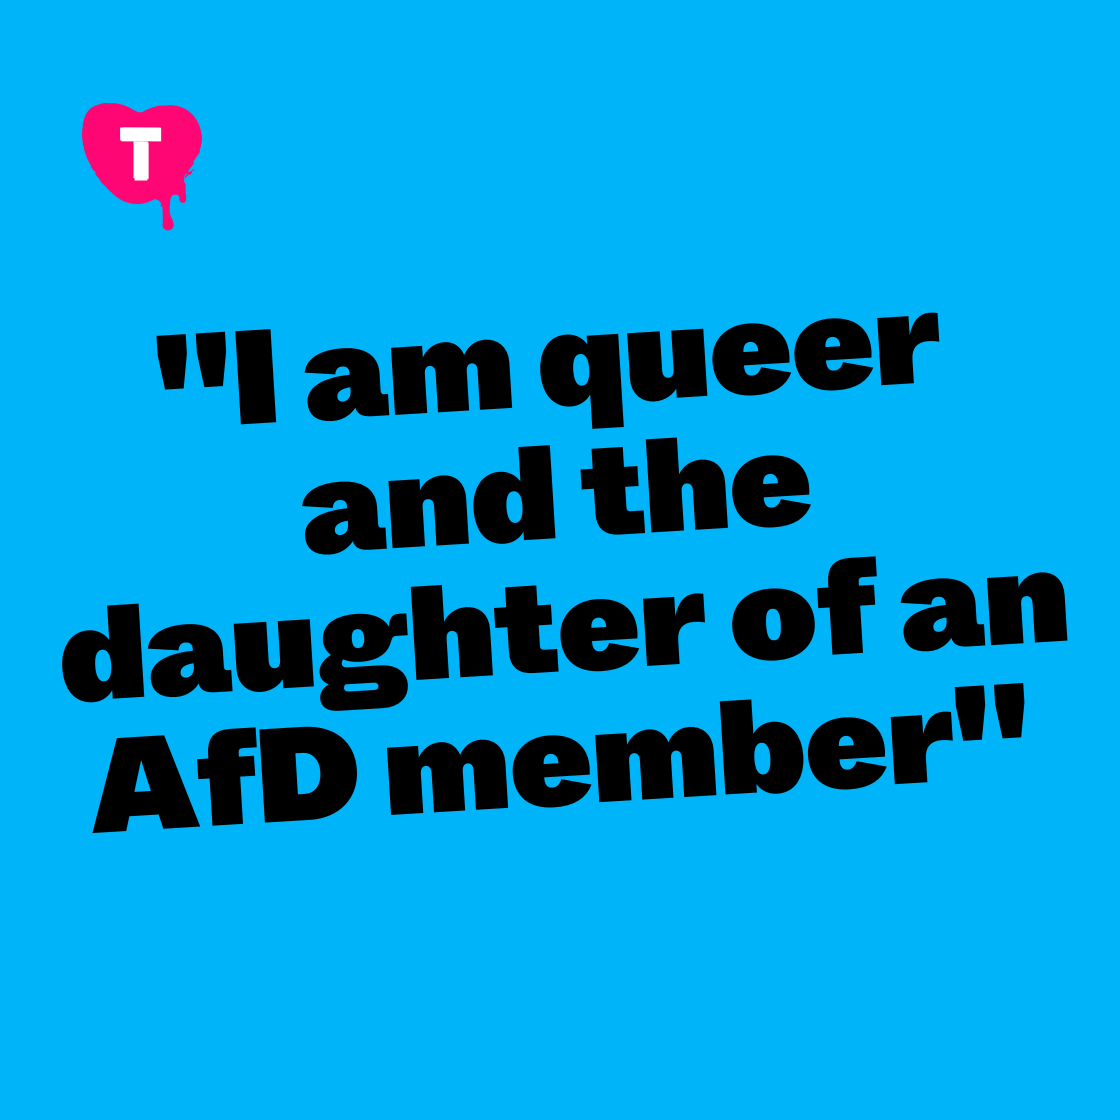 "I am queer and the daughter of an AfD member"